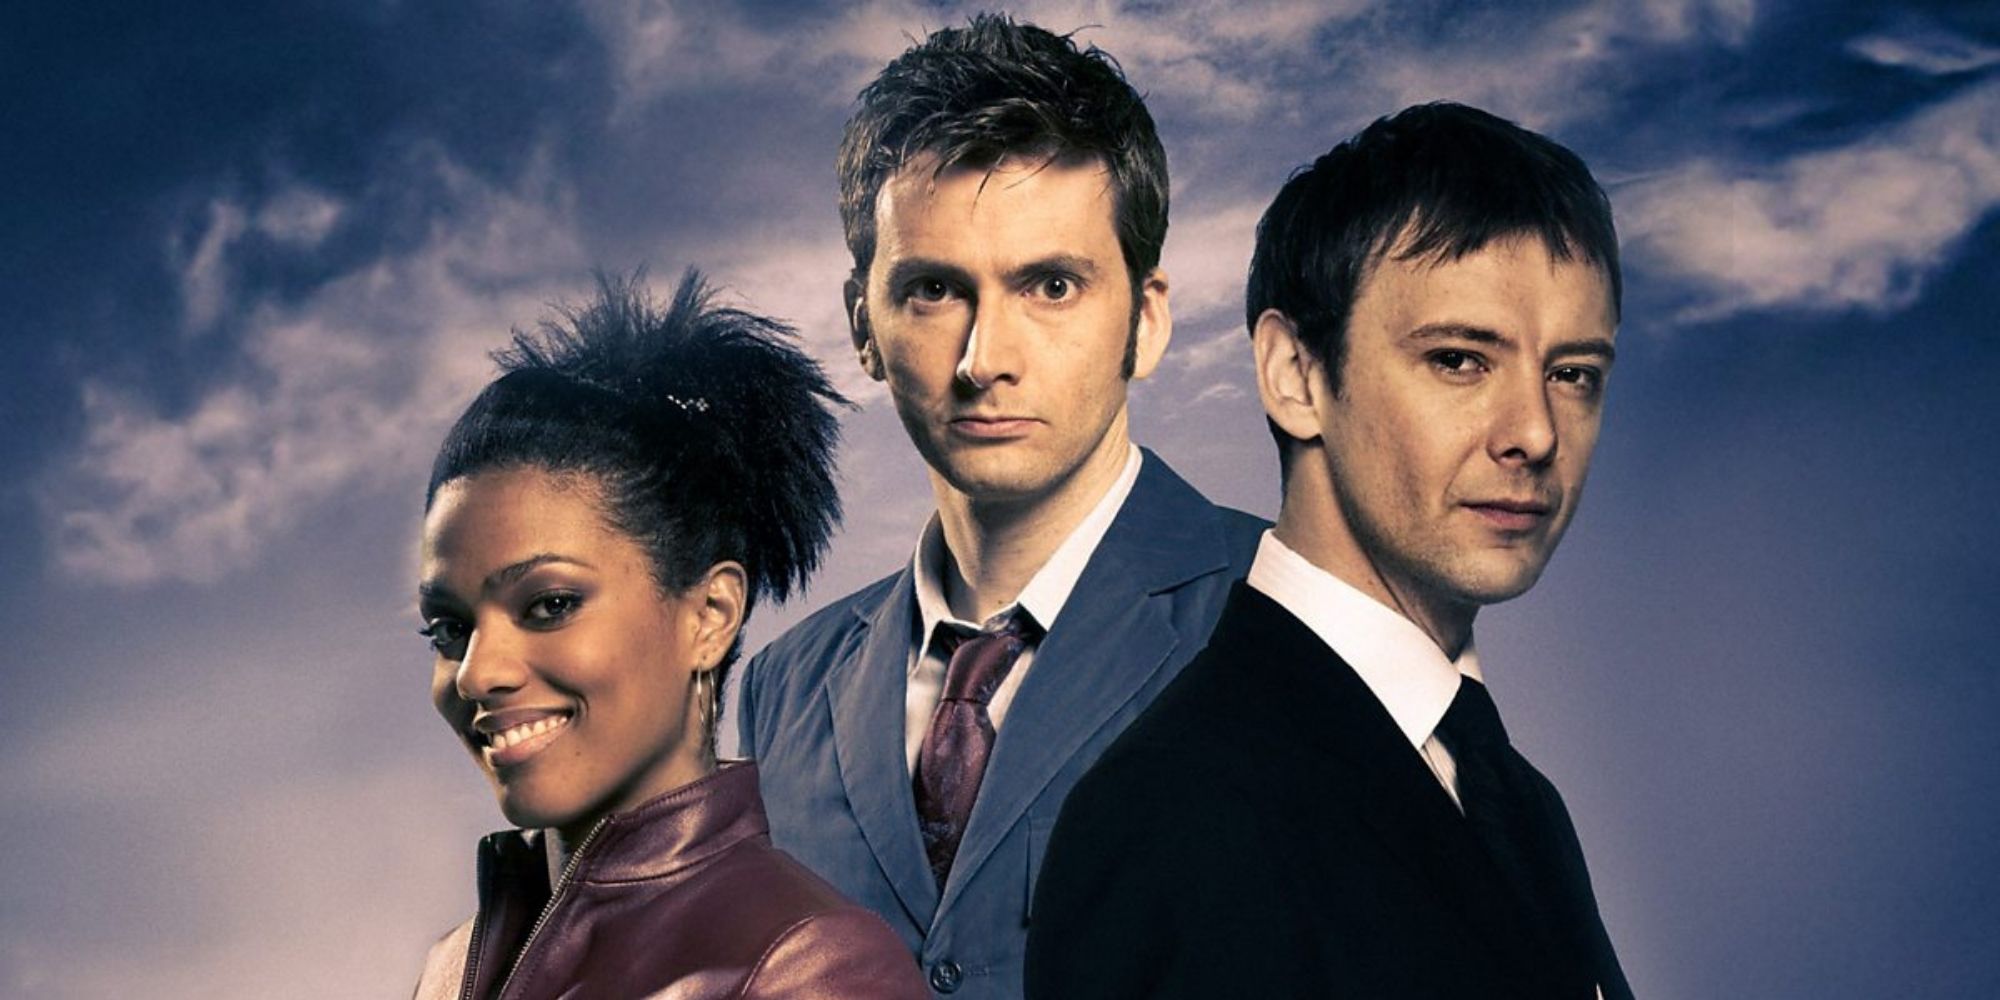 Promotional image of Last of the Time Lords, an episode from the TV show Doctor Who.